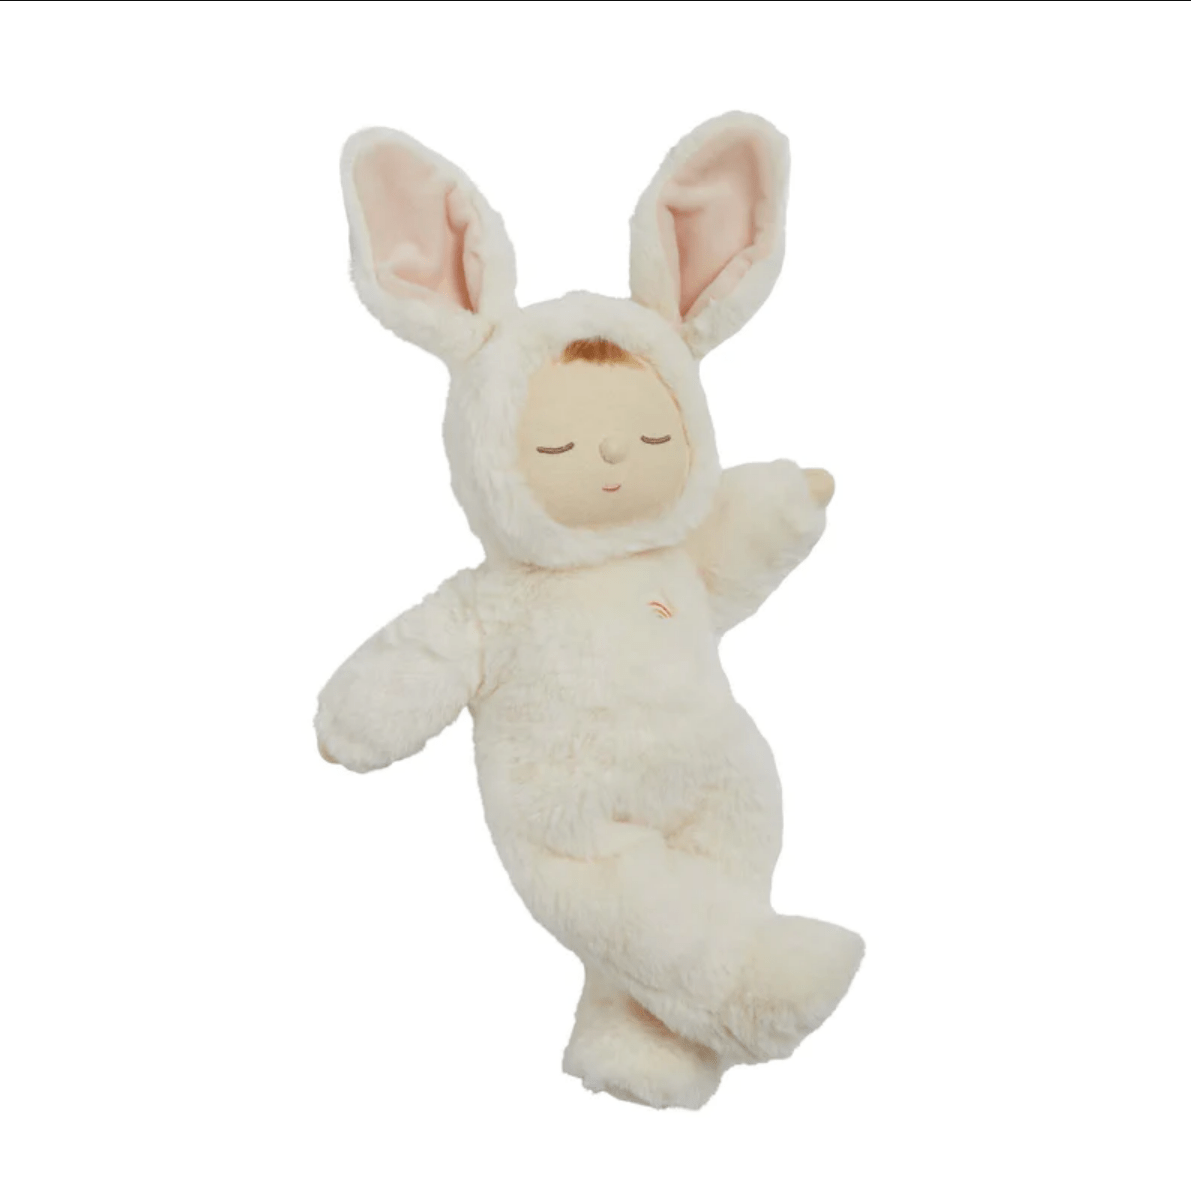 Olli Ella Soft Toys Cozy Dinkum Doll (Bunny Moppet) by Olli Ella Mousy Pickle Cozy Dinkum Doll | Plush Cotton Cuddly Companion for Newborns and Toddlers